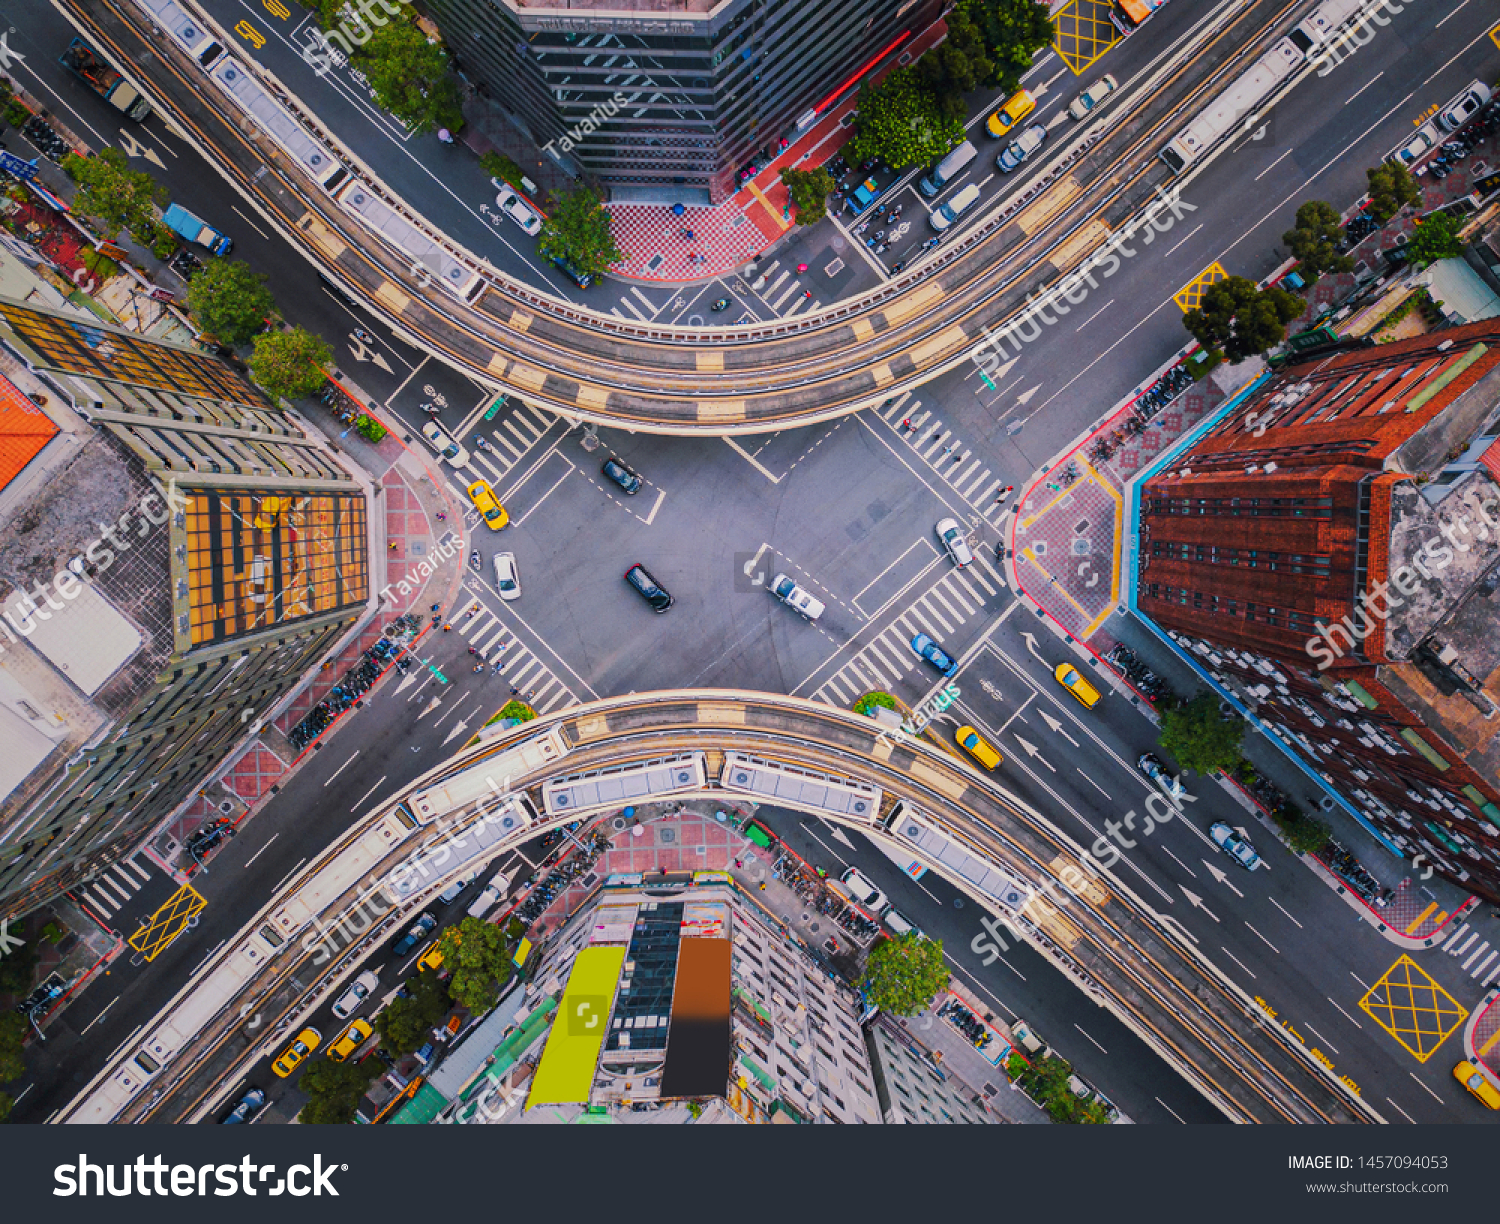 Aerial view of cars and trains with intersection or junction with traffic, Taipei Downtown, Taiwan. Financial district and business area. Smart urban city technology. #1457094053